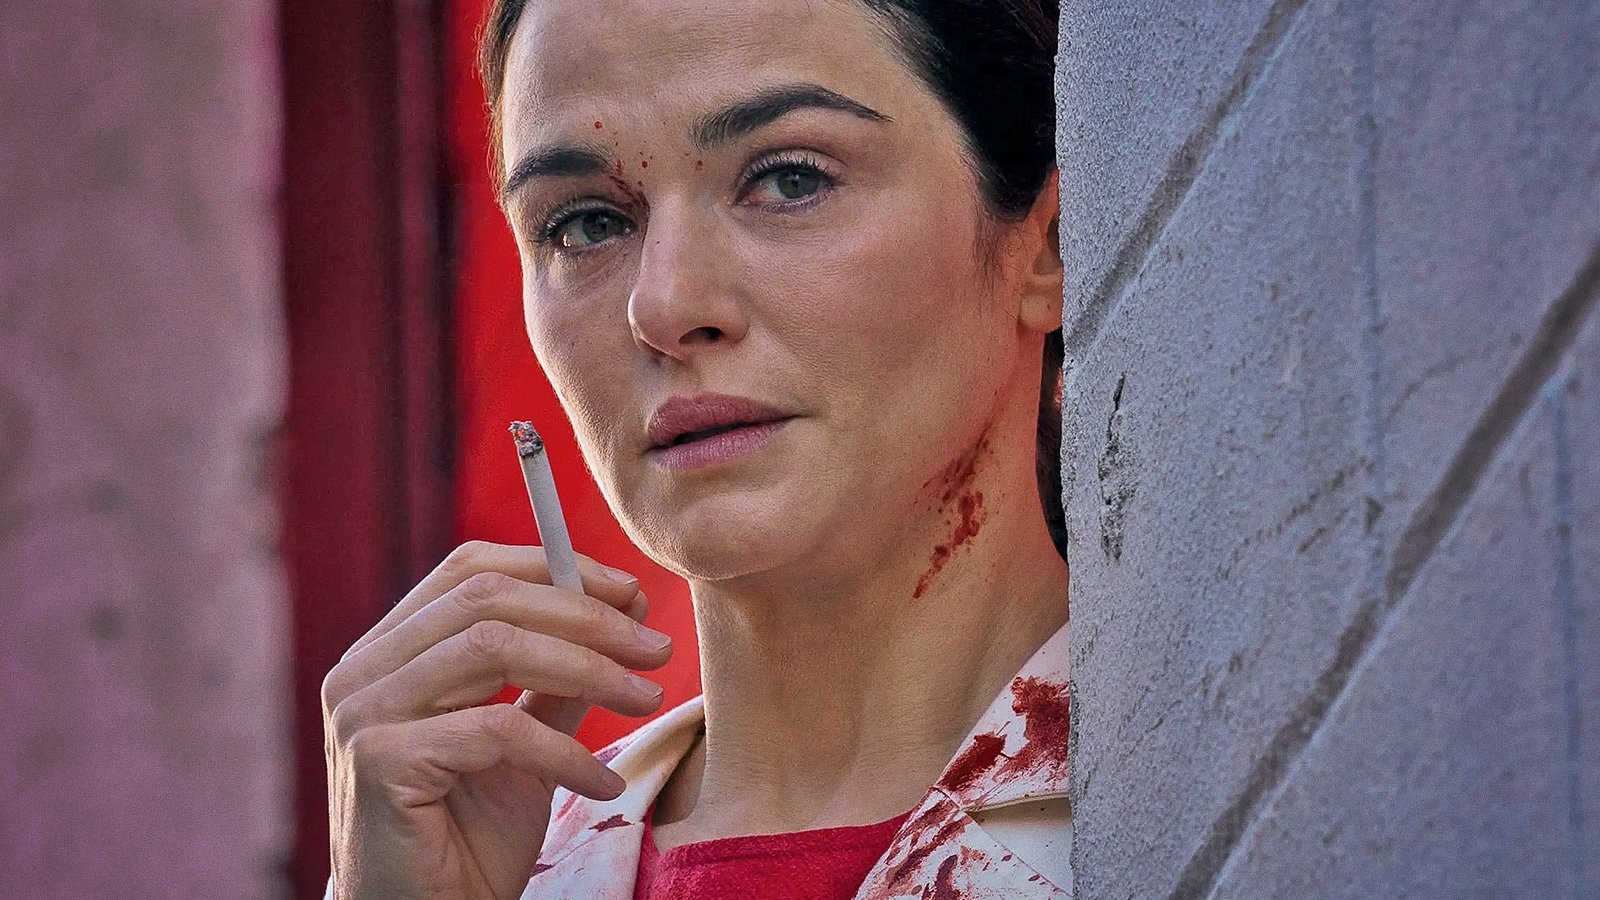 Dead Ringers, Rachel Weisz on the series inspired by Cronenberg: "The biggest challenge of my career"